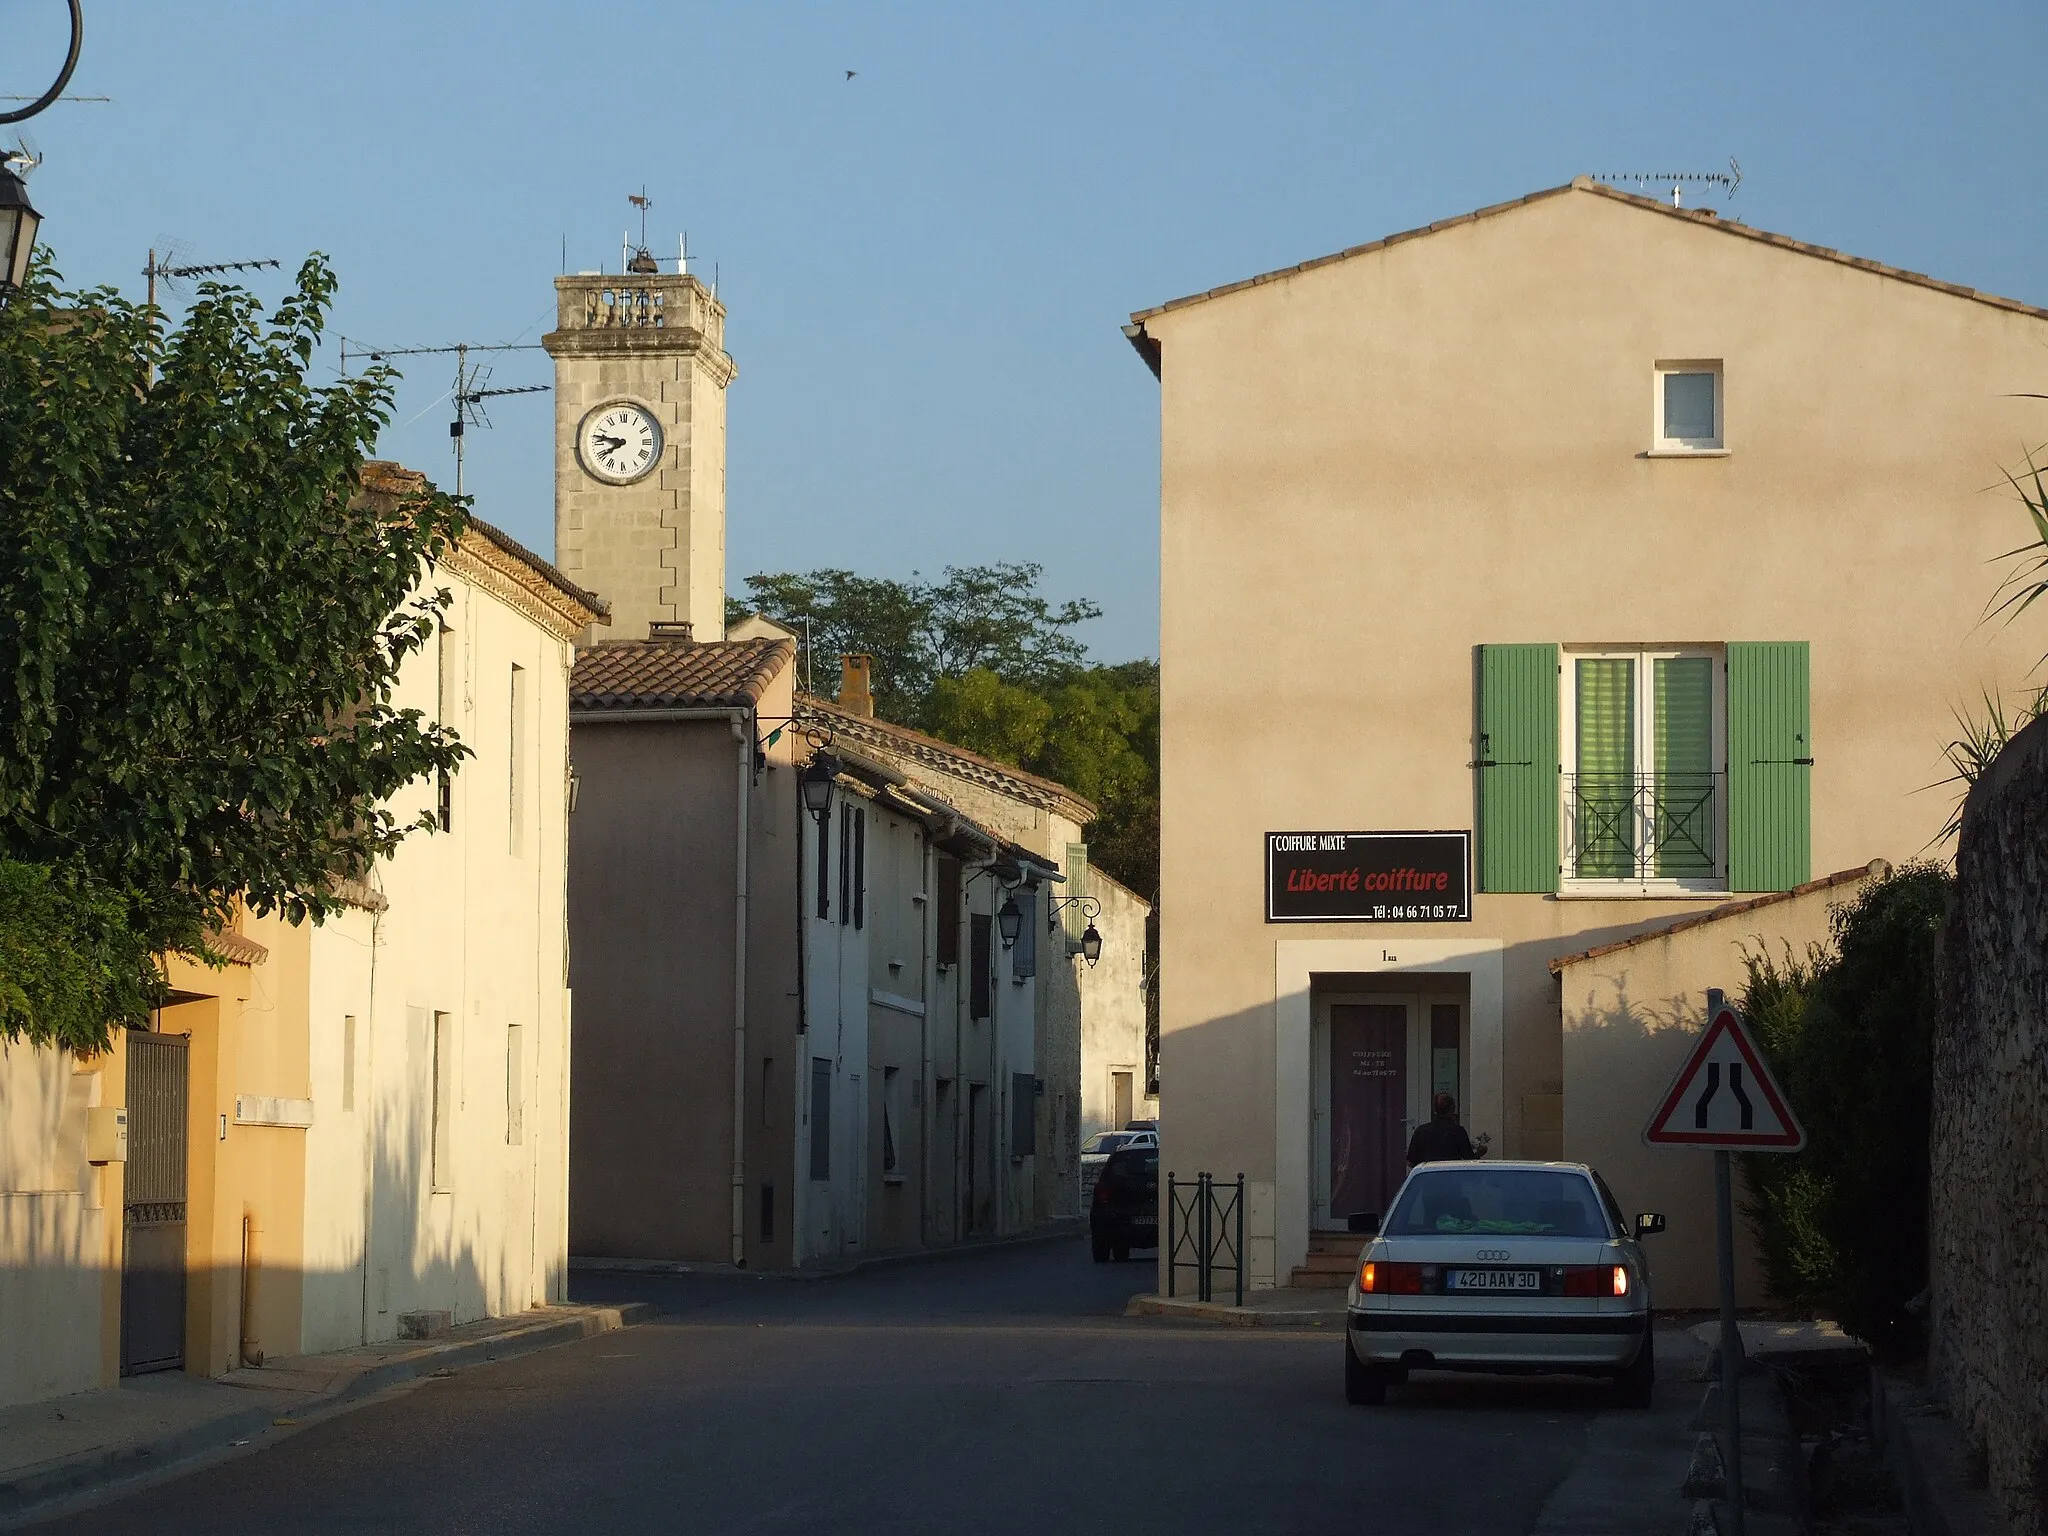 Image of Languedoc-Roussillon